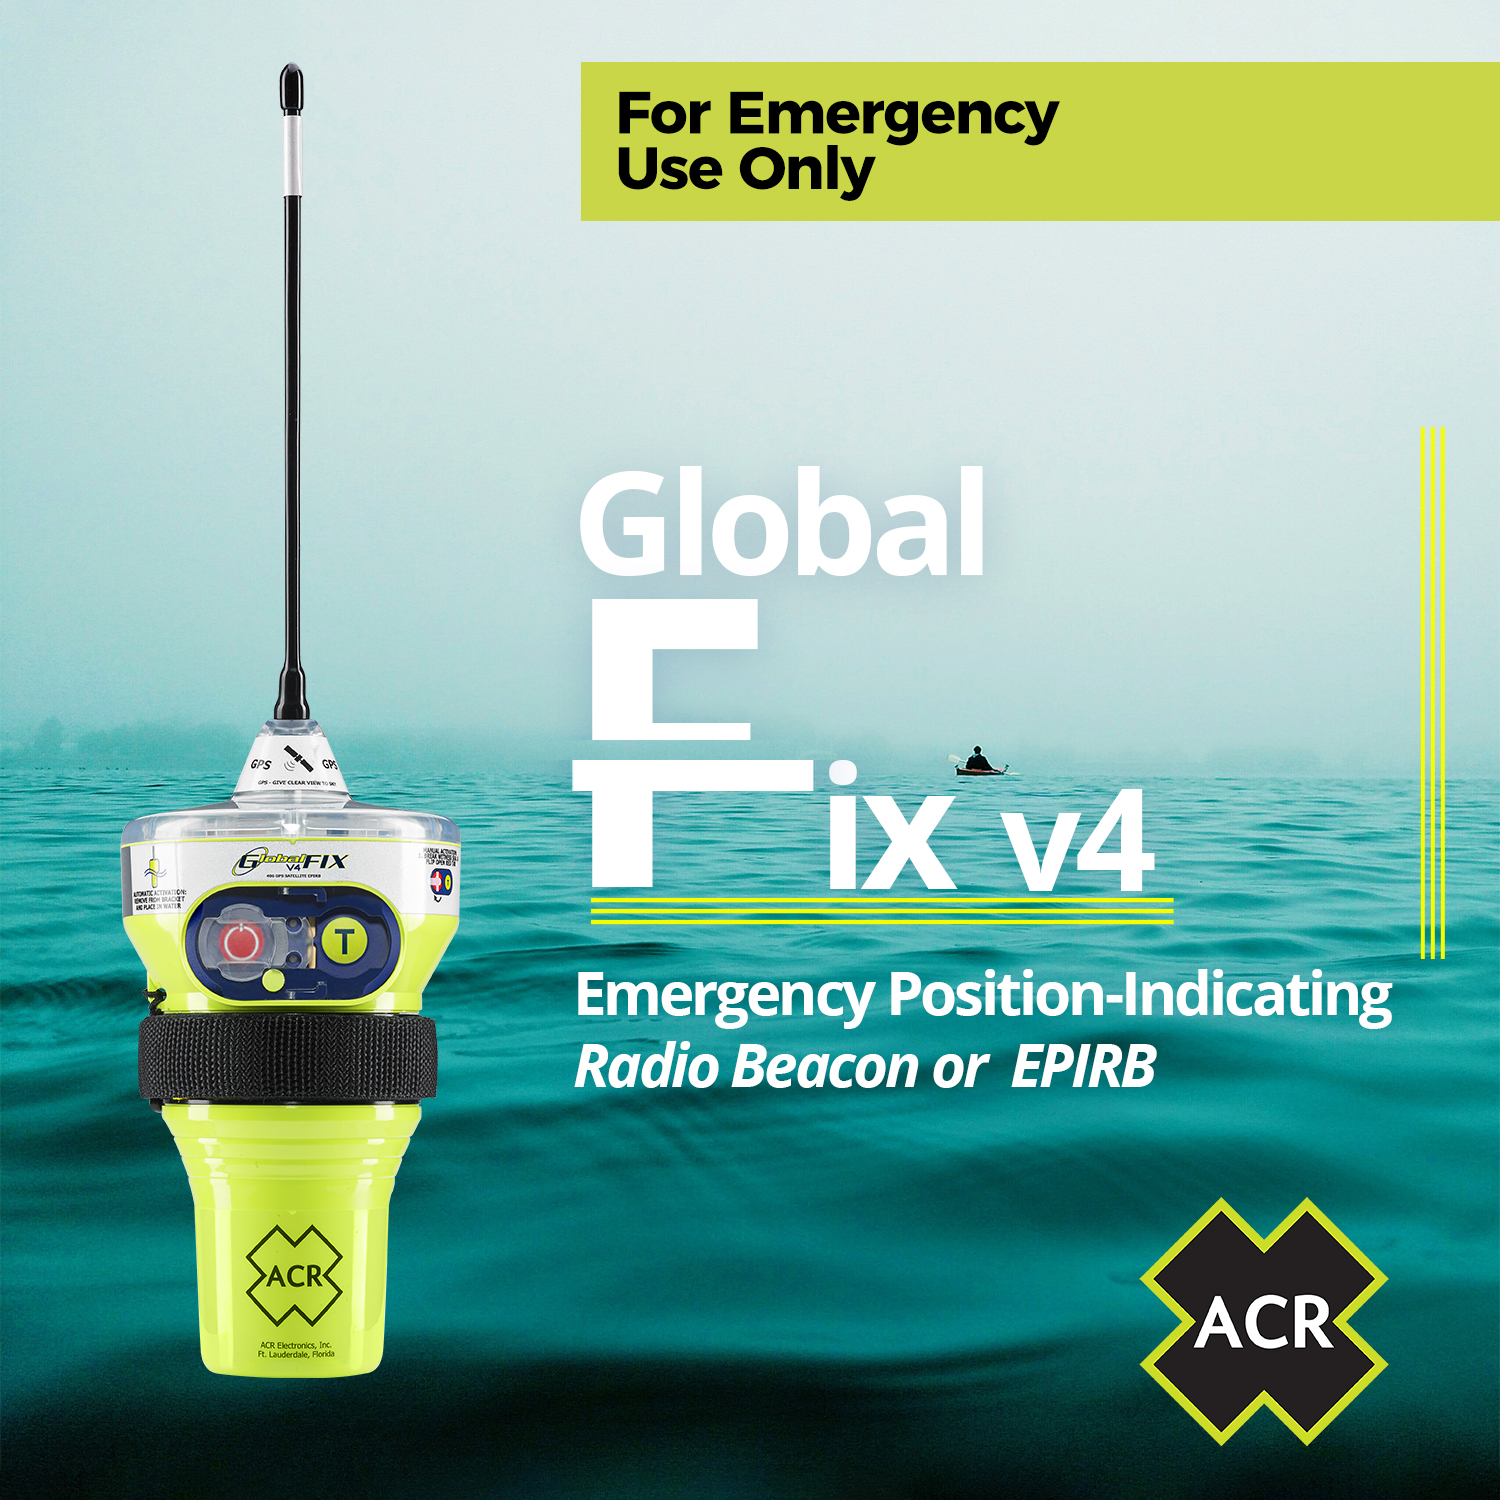 ACR GlobalFix V4 GPS EPIRB W/ Manual Release (Category 2) | Emergency Distress Beacon | High Impact UV Resistant Emergency Position Indicating Radio Beacon - image 4 of 6